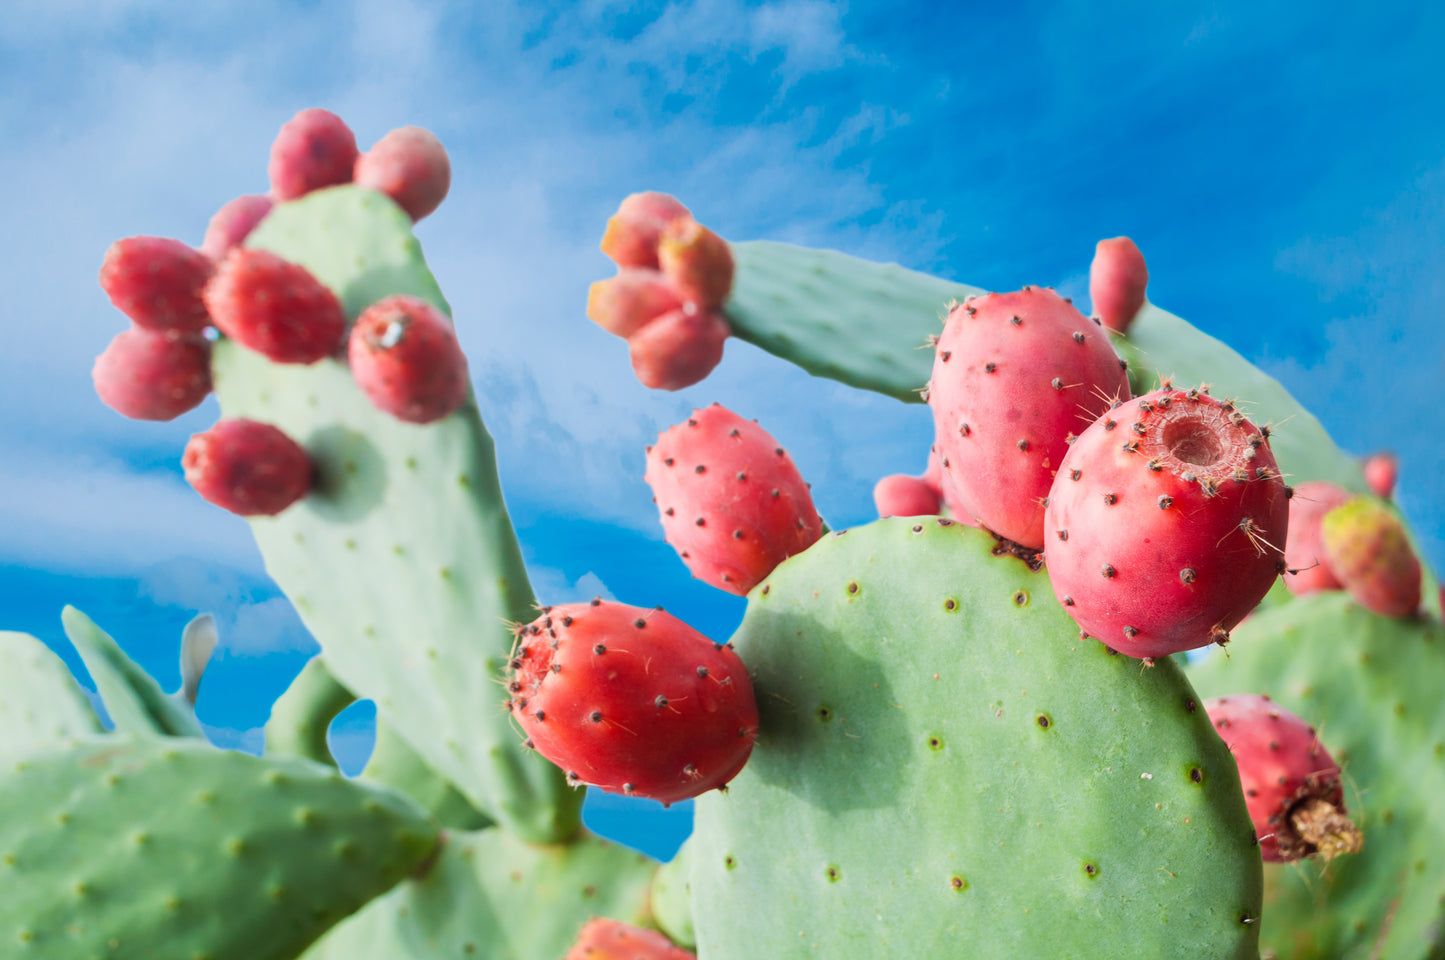 Spineless Prickly Pear Cactus